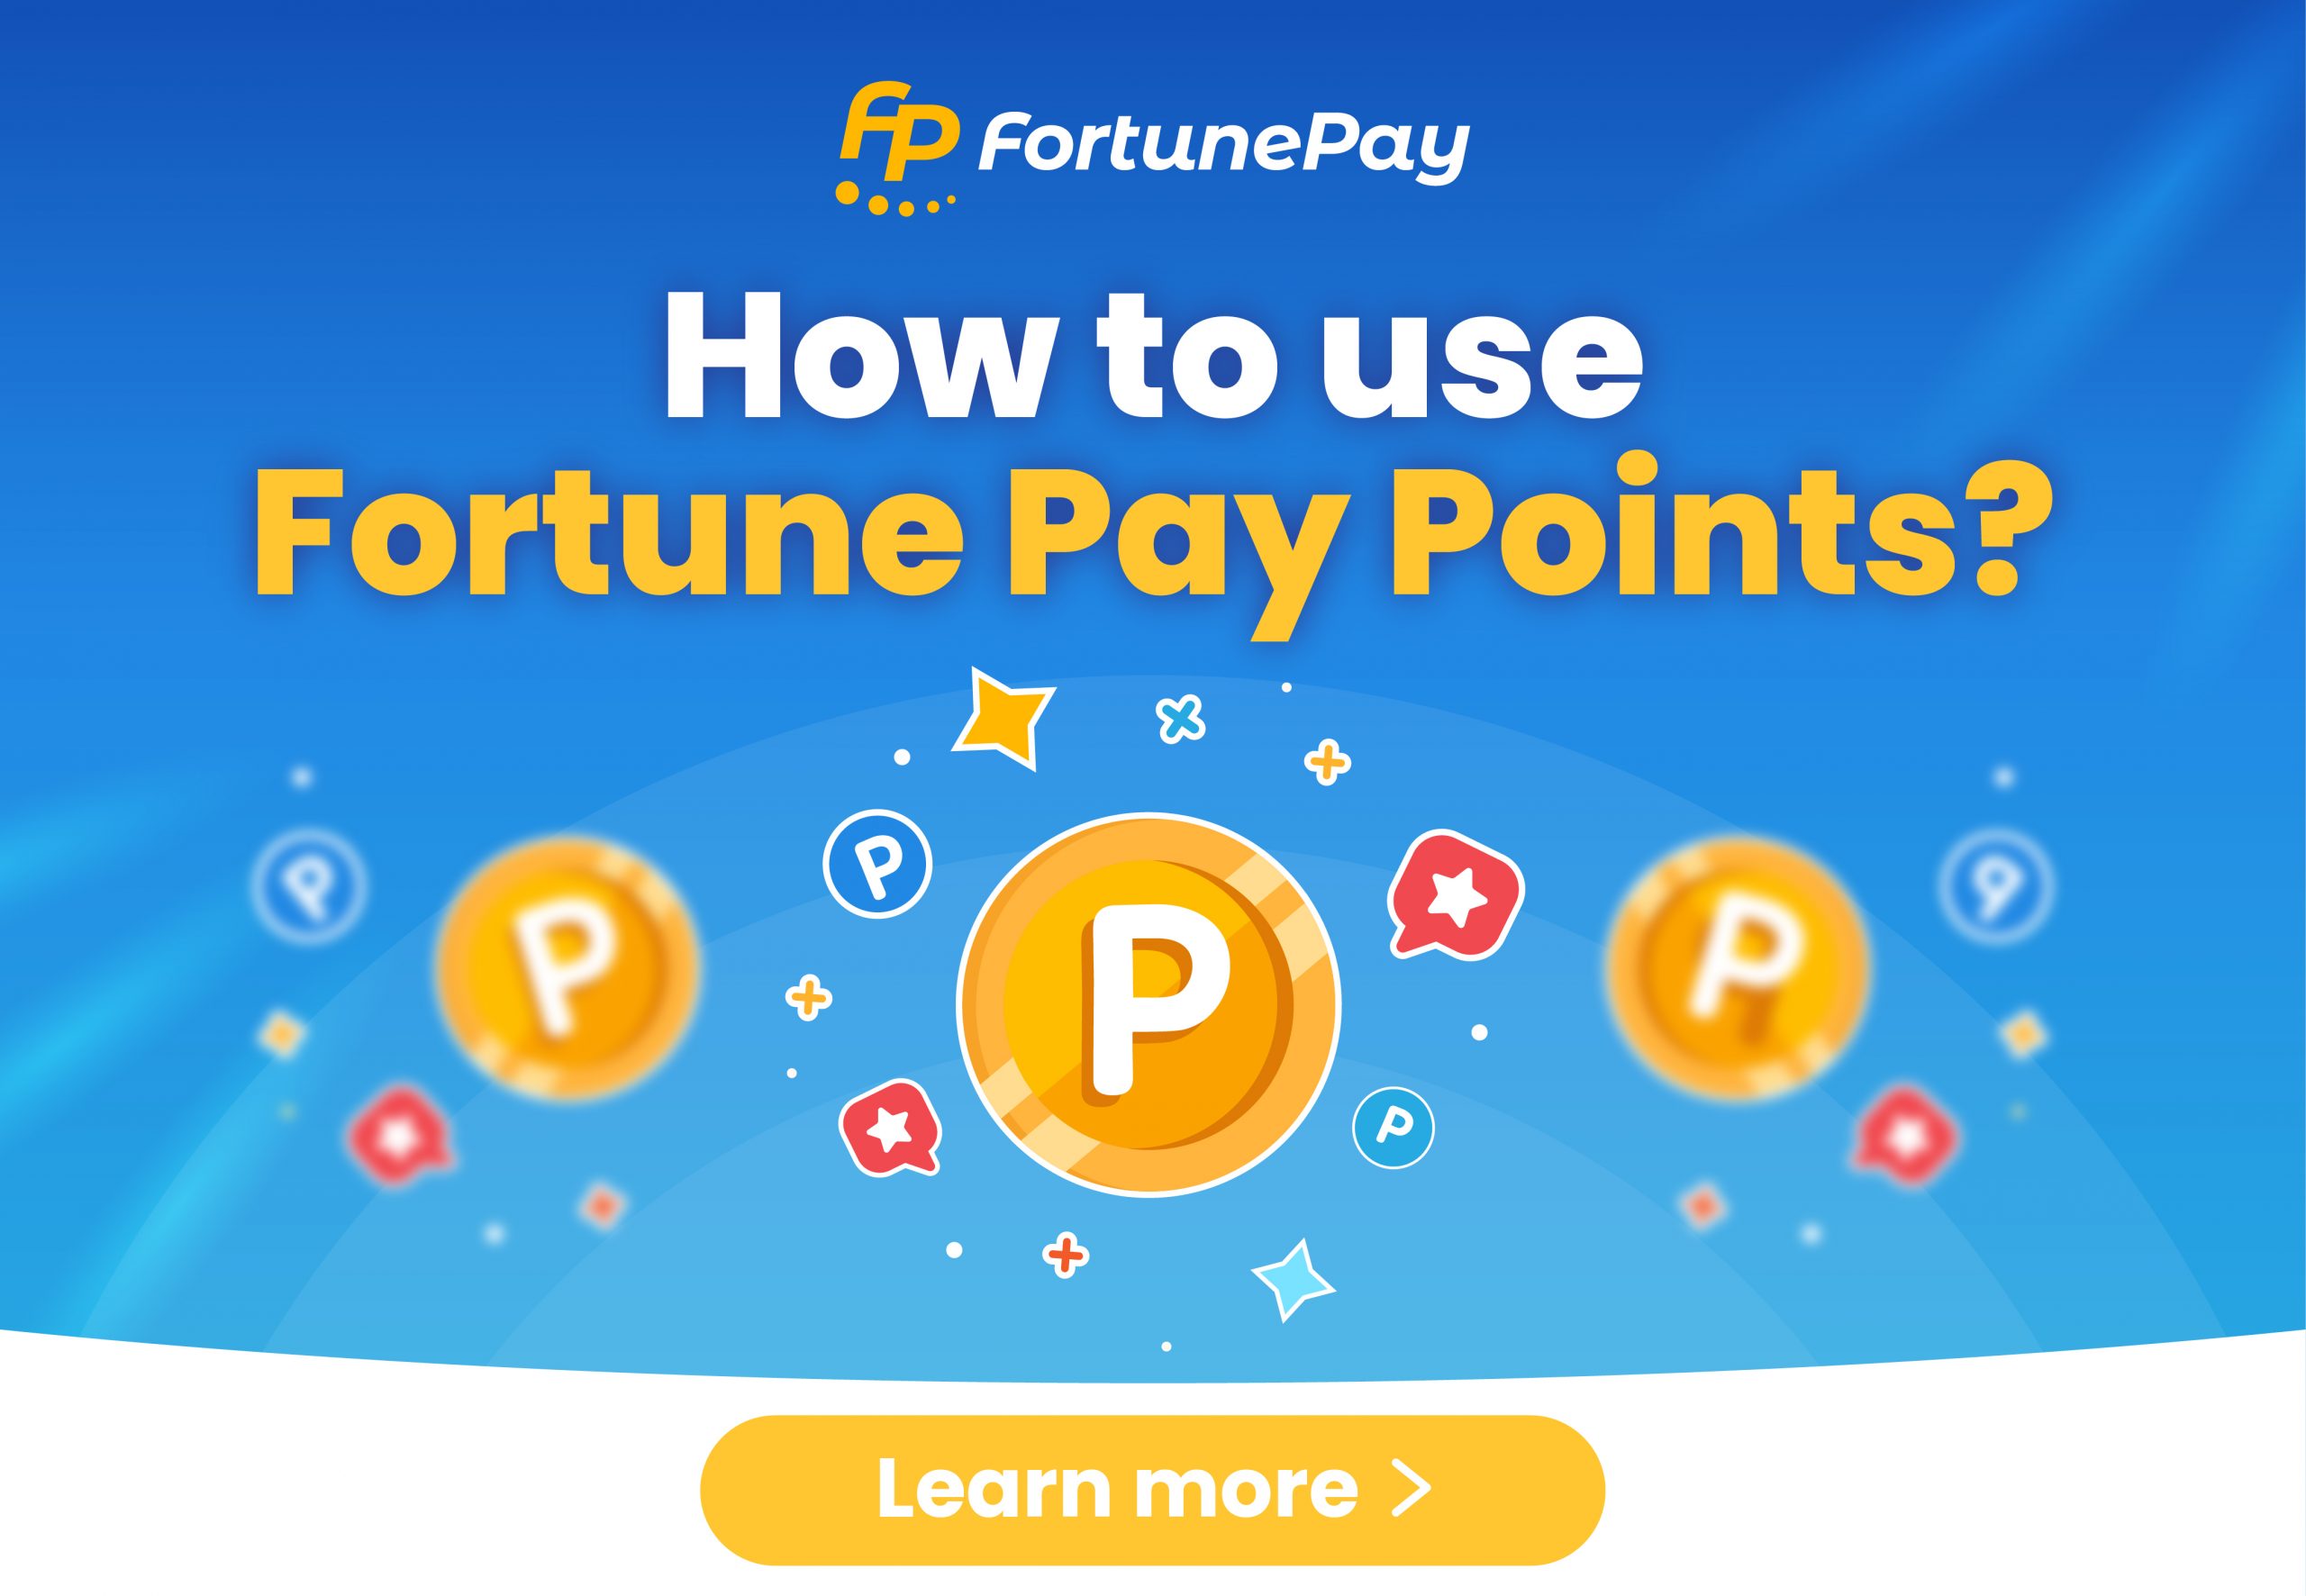 Fortune Pay Rewards and Points